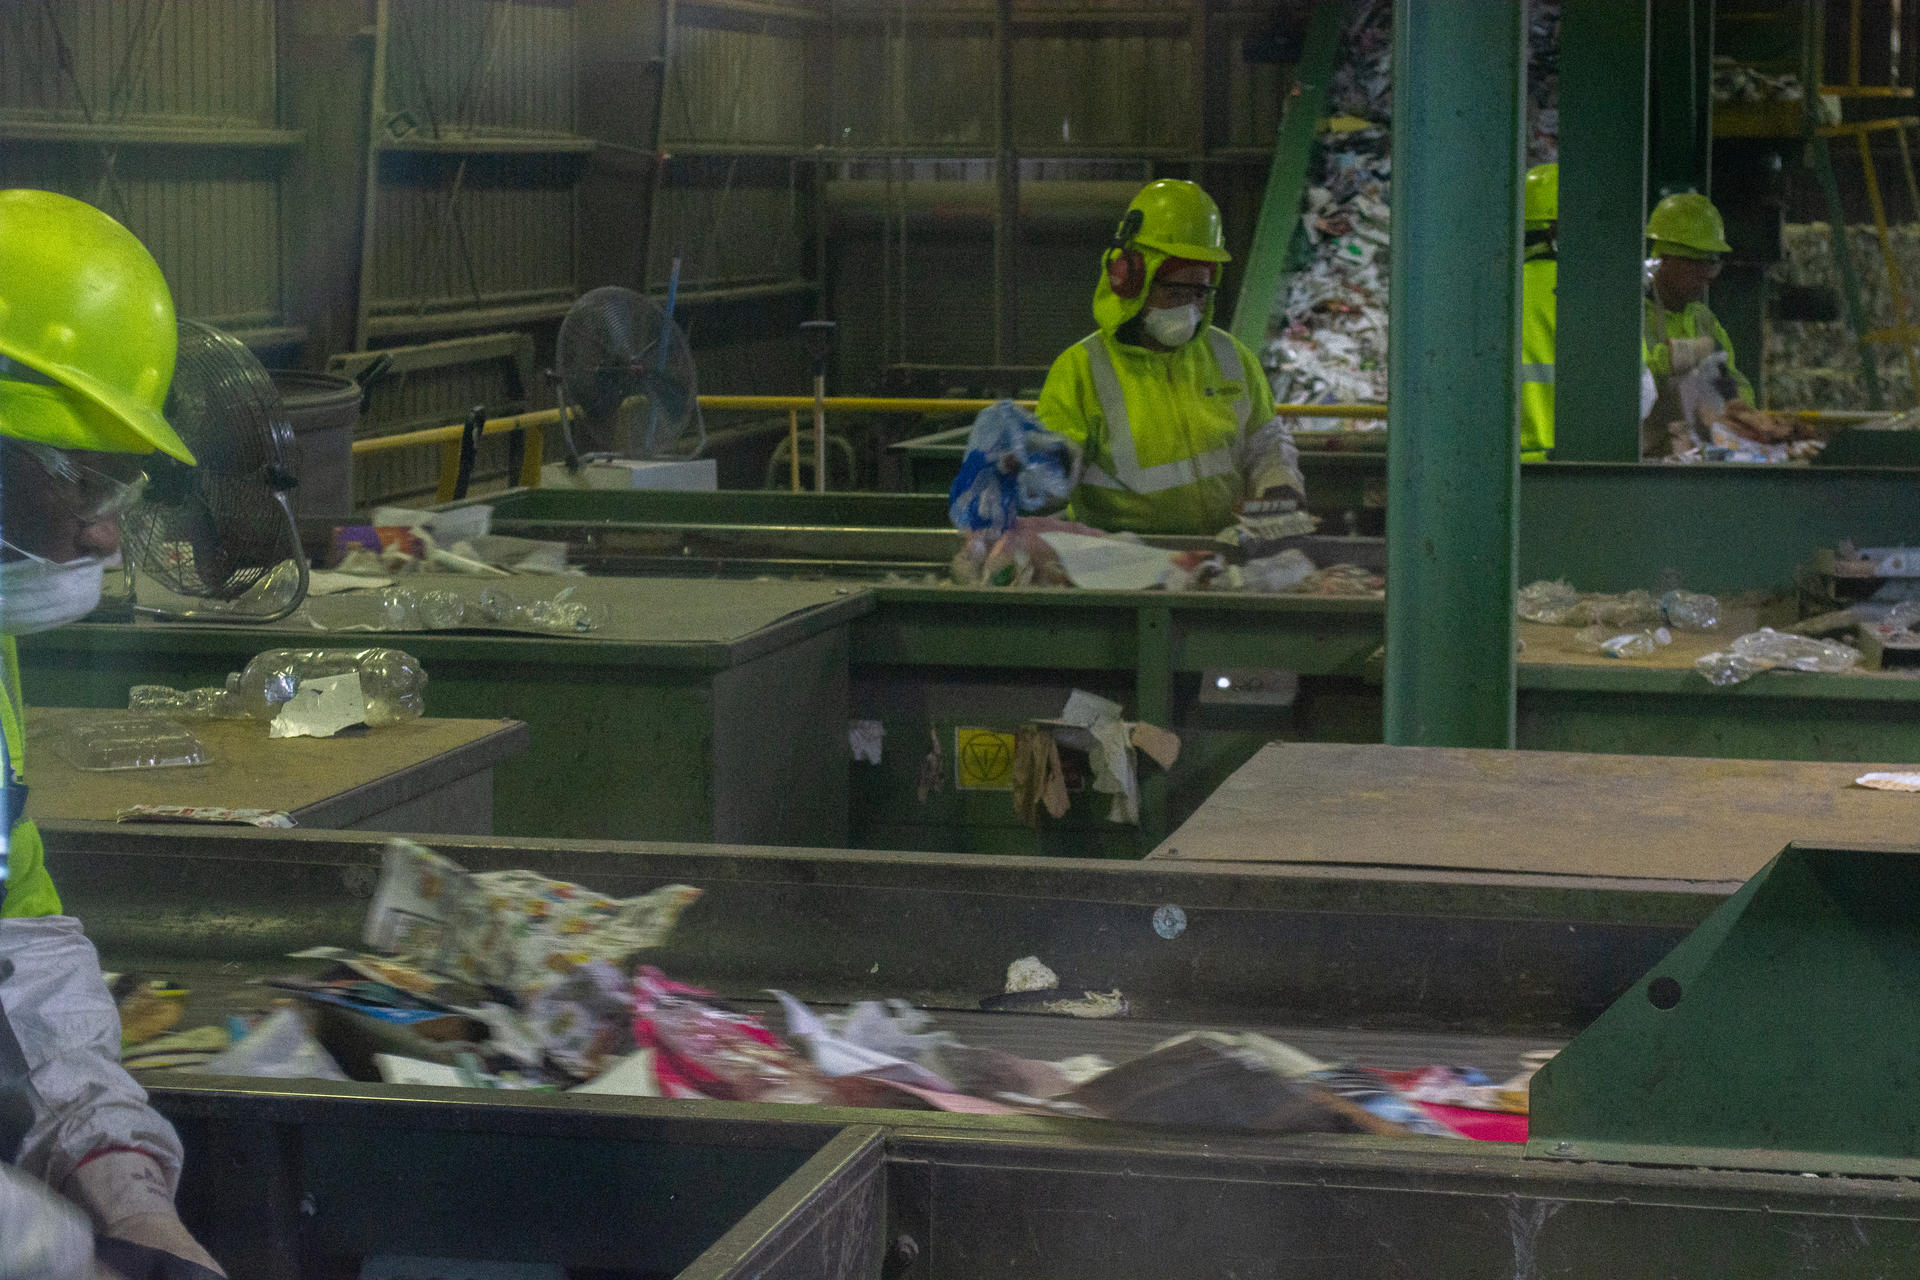 Photograph of two persons manually sorting waste at the Rhode Island Resource Recovery Center